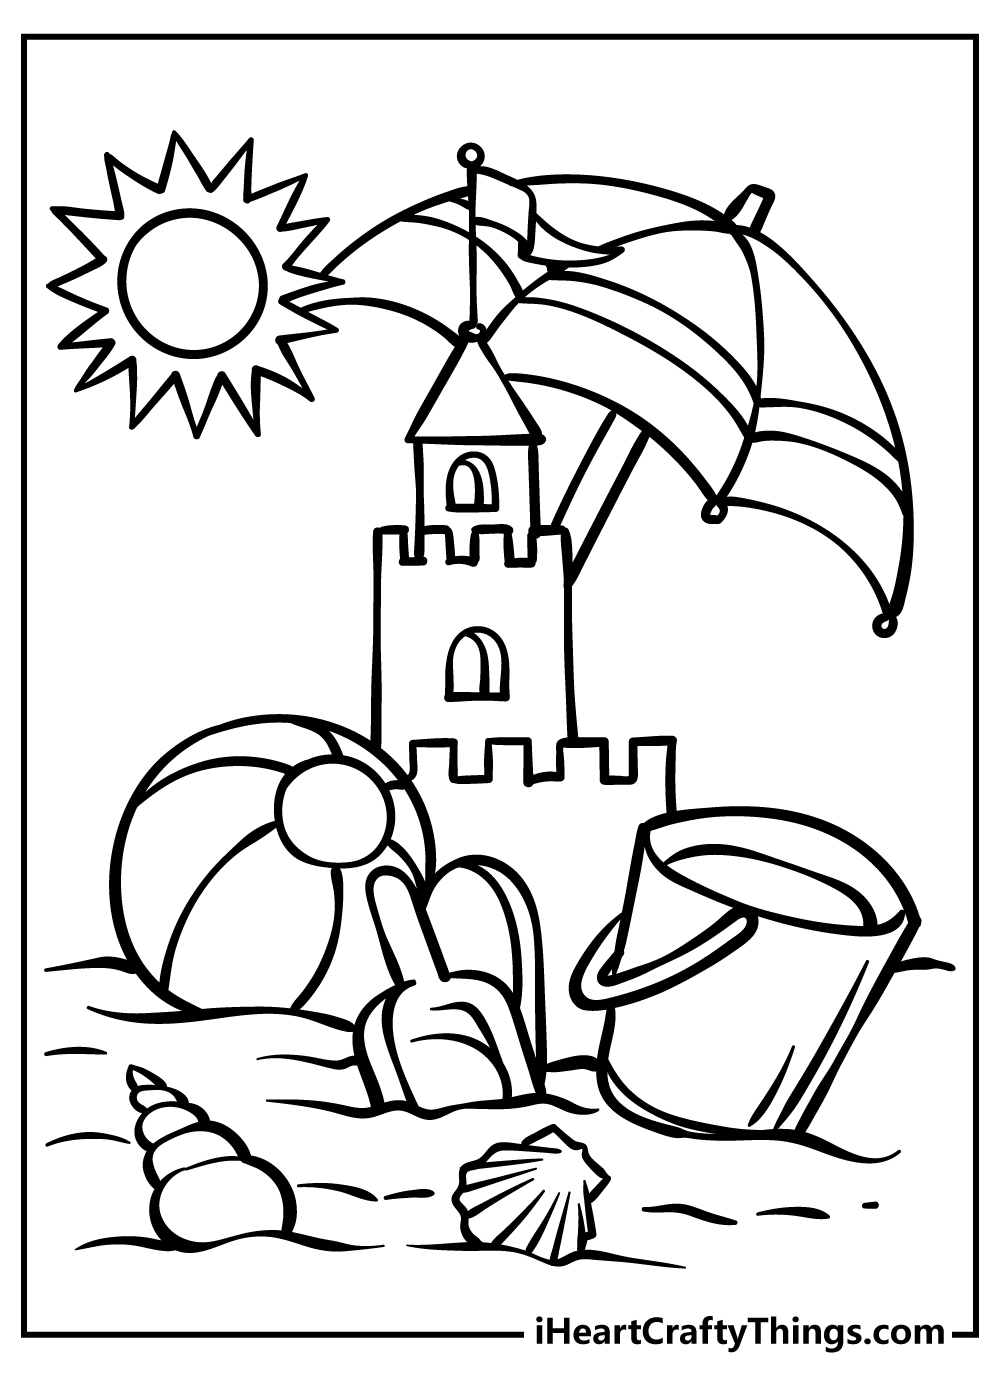 Free Printable Summertime Coloring Pages Printable Templates